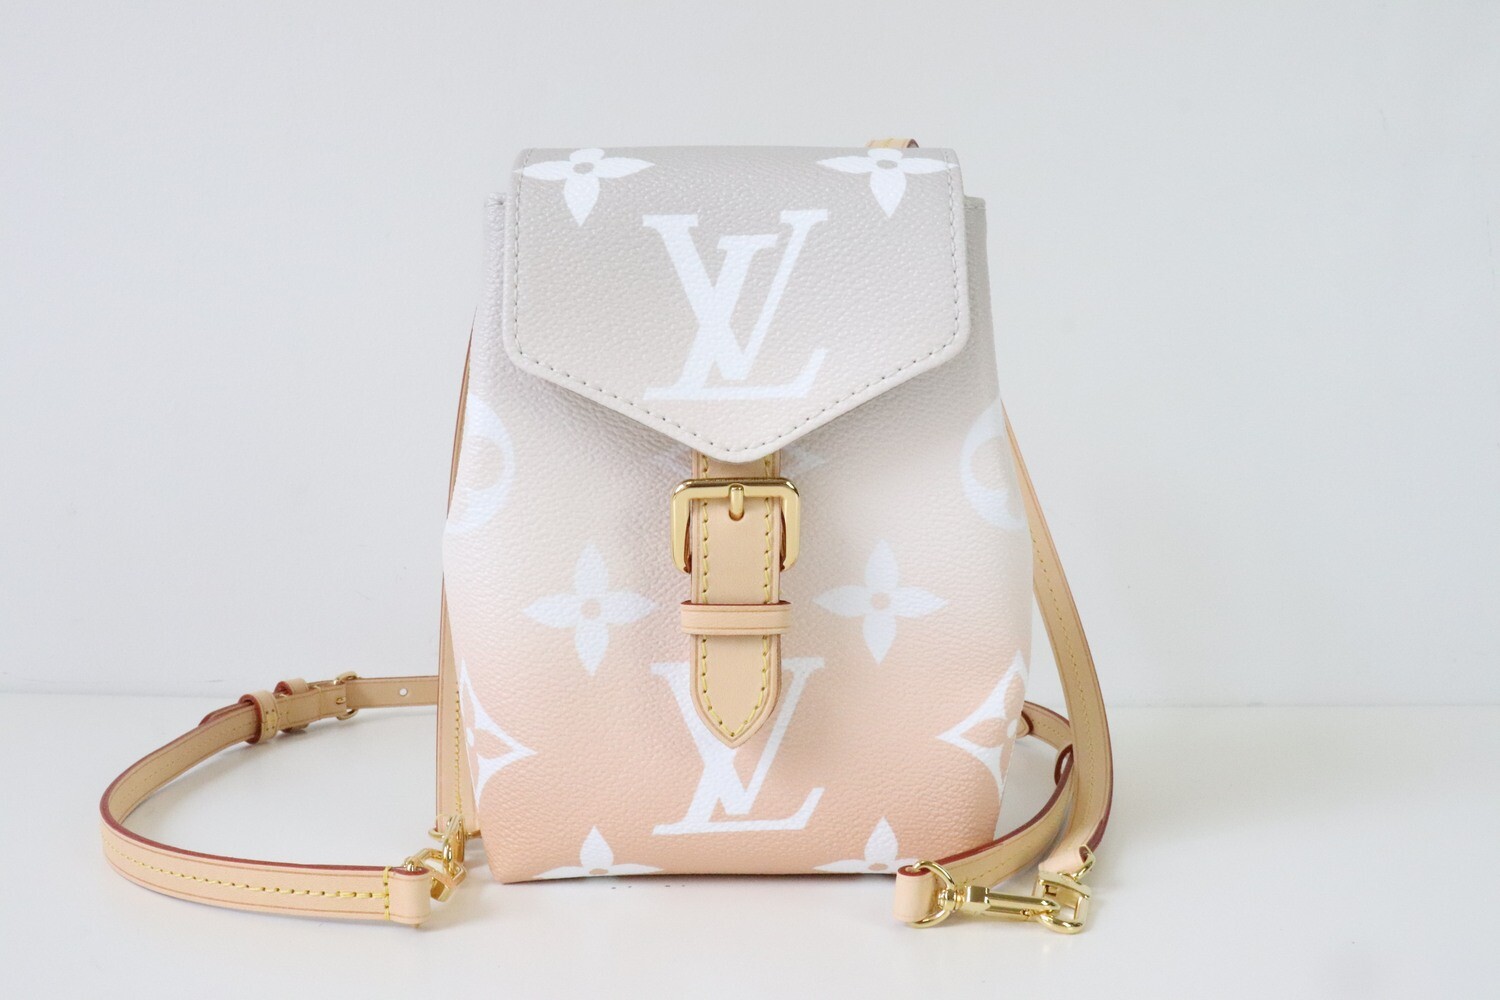 Louis Vuitton Monogram by The Pool Tiny Backpack Gris Bloom M45764 LV Auth 39091 in Gris/Bloom, Women's